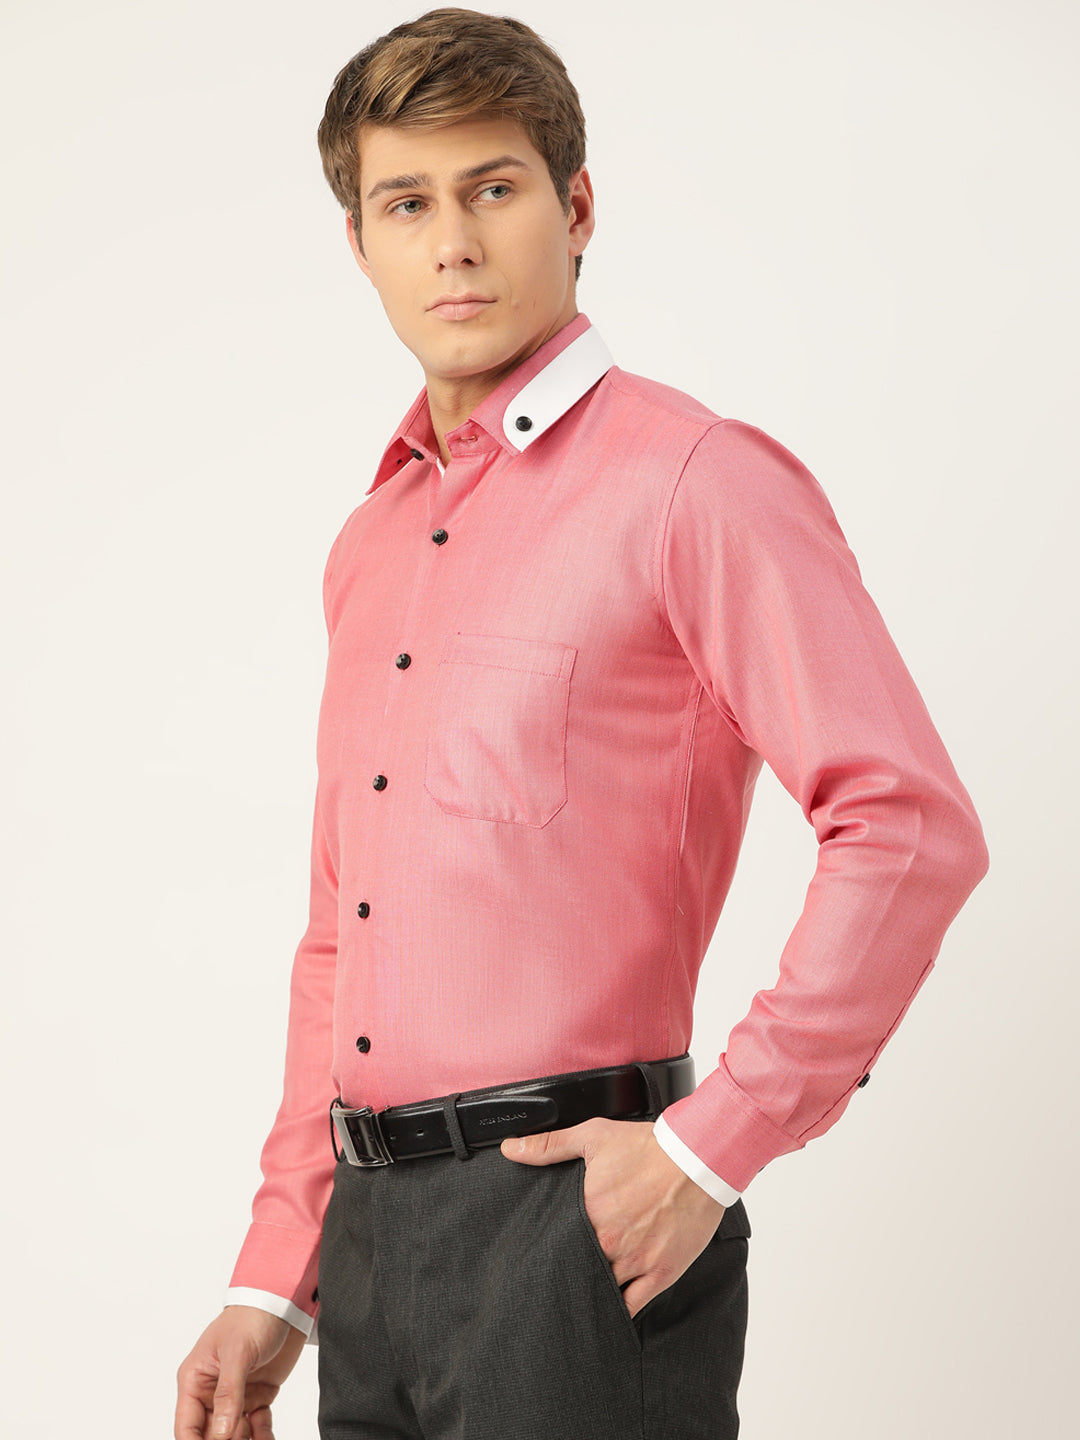 Men's  Cotton Solid Formal Shirts ( SF 796Red ) - Jainish